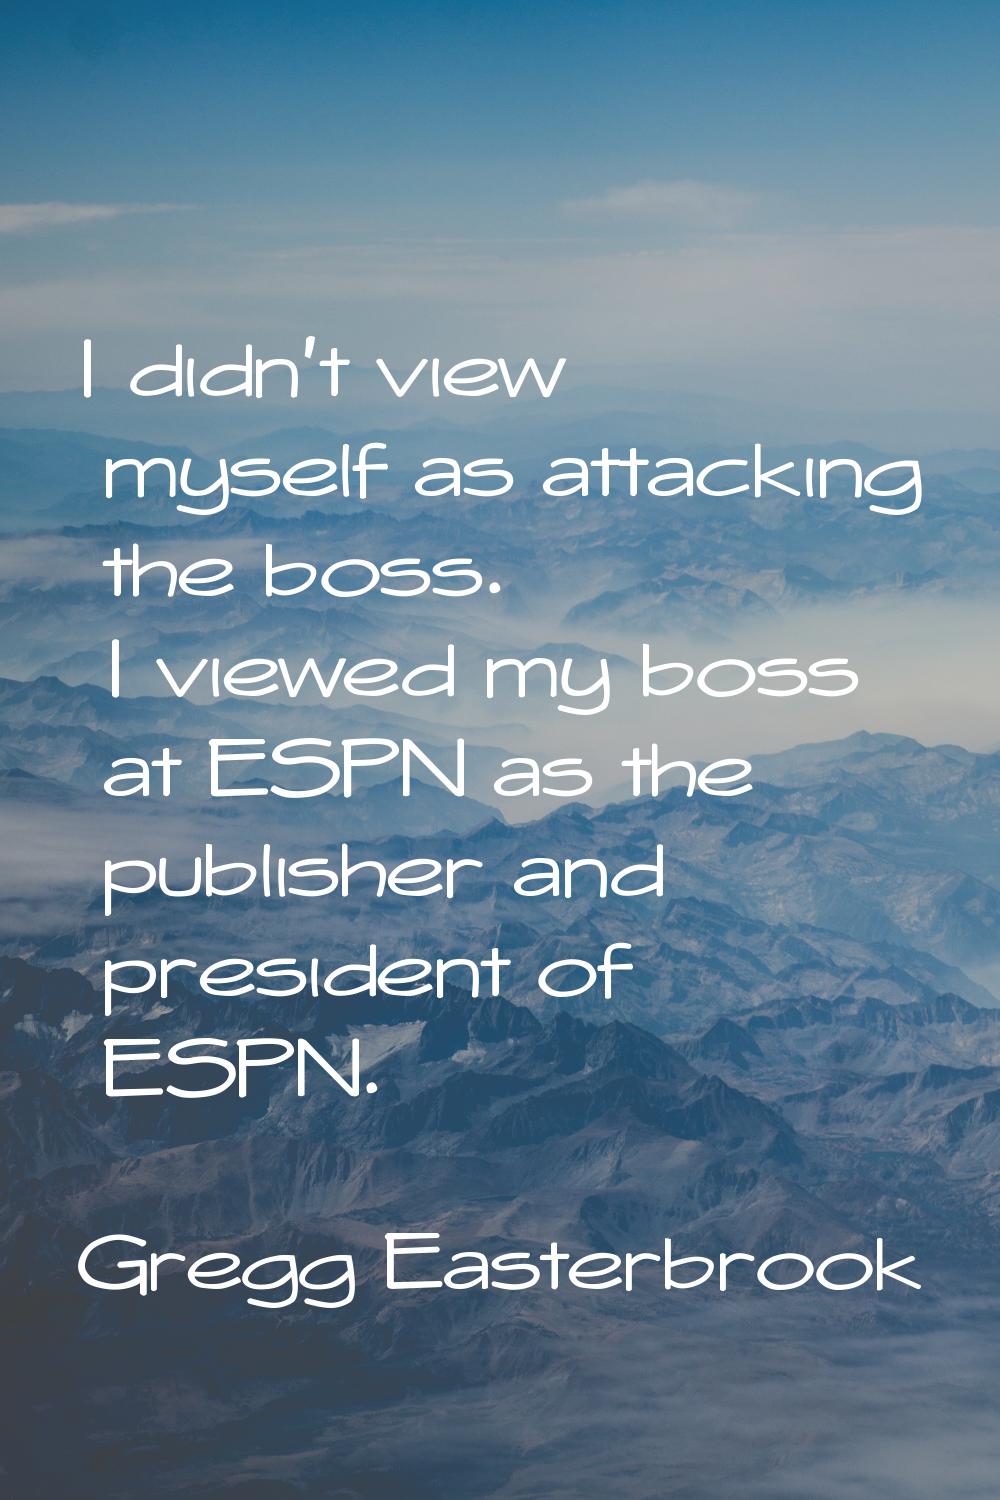 I didn't view myself as attacking the boss. I viewed my boss at ESPN as the publisher and president